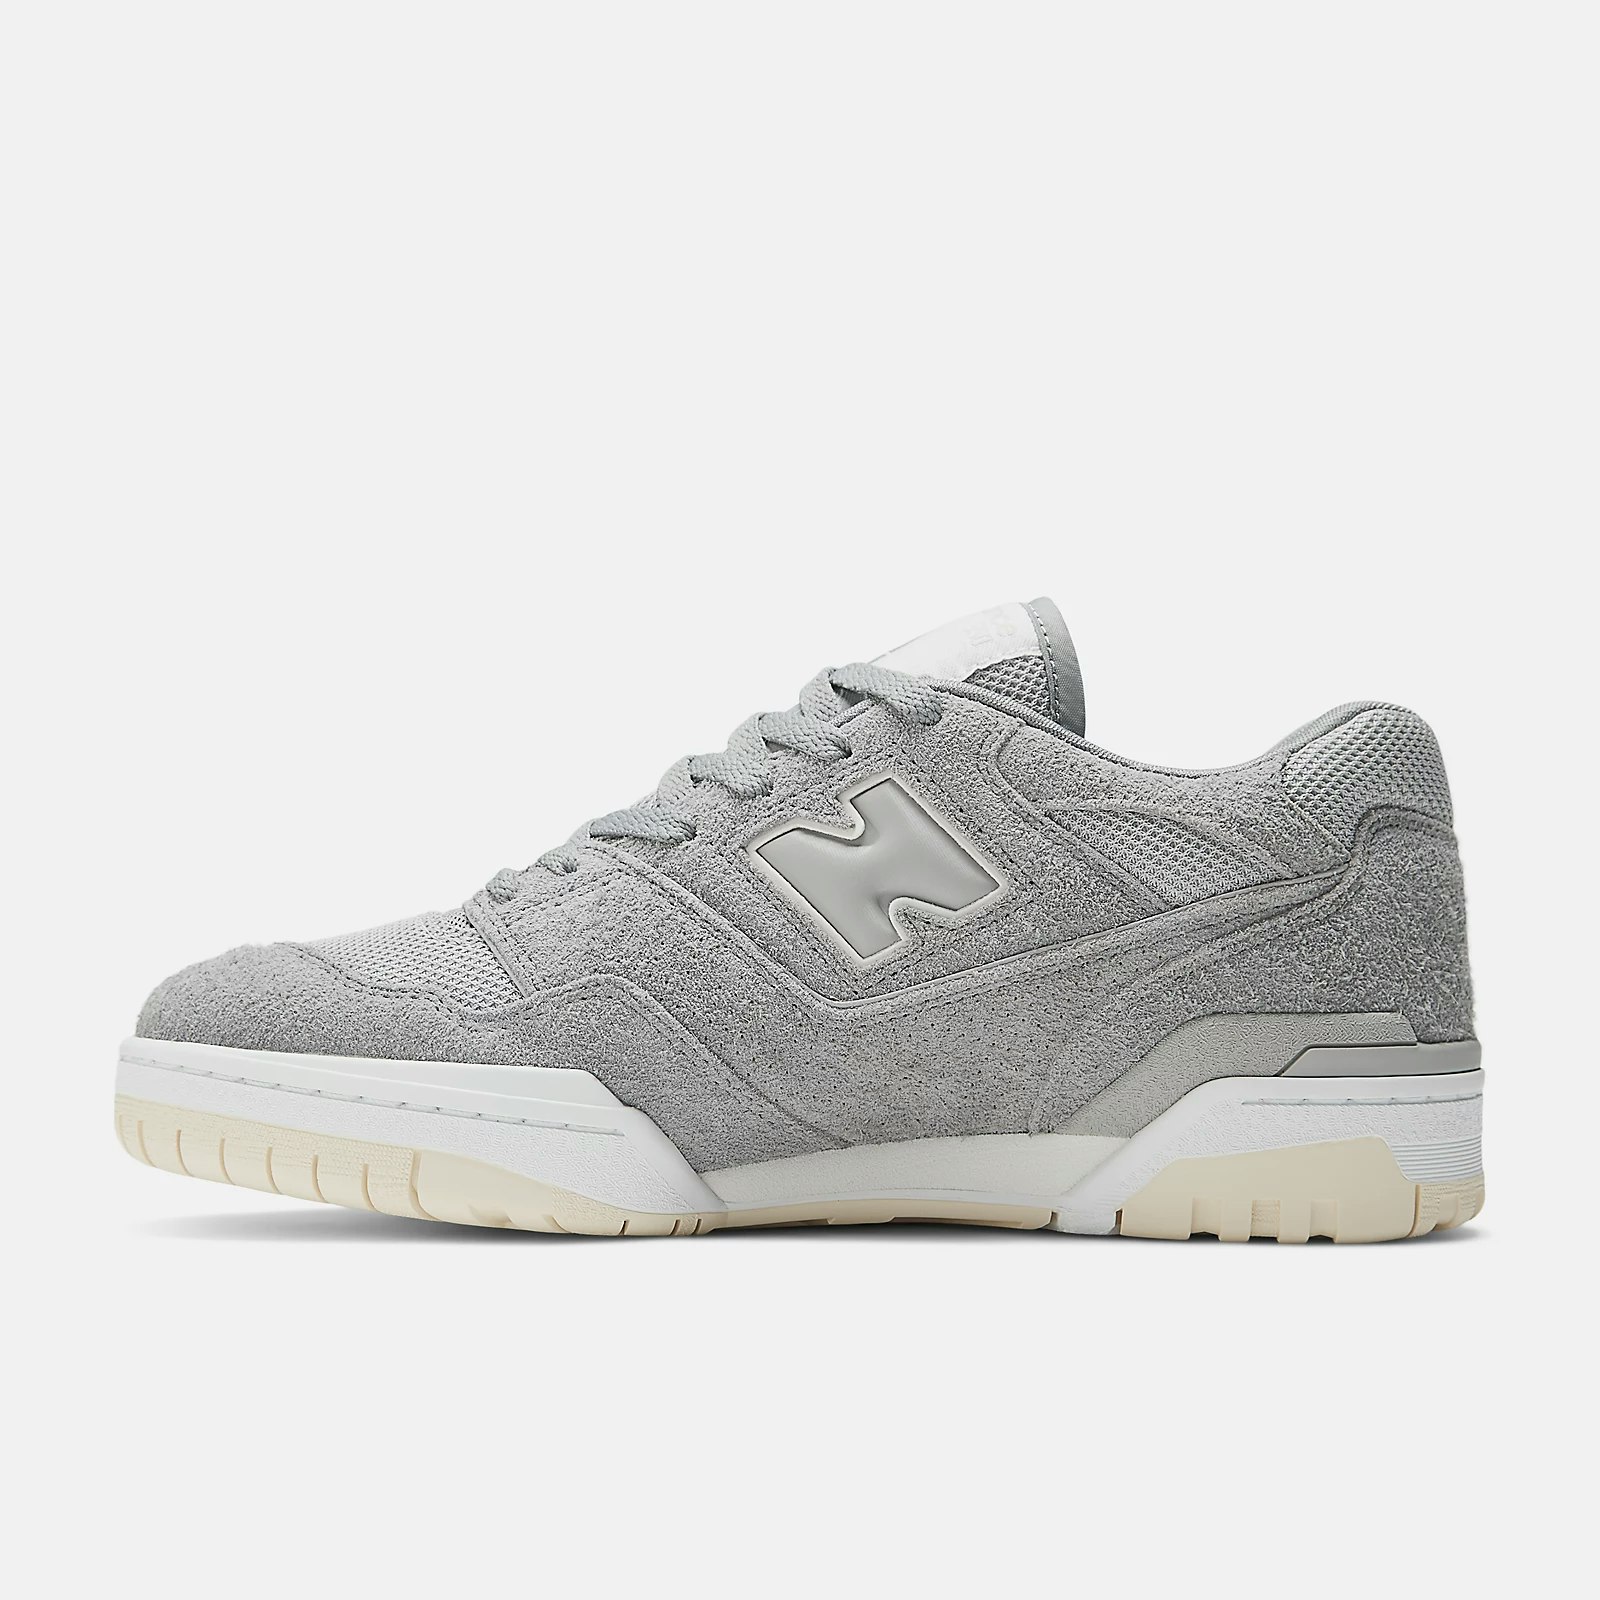 New Balance 550 "Suede Pack" (Slate Grey)